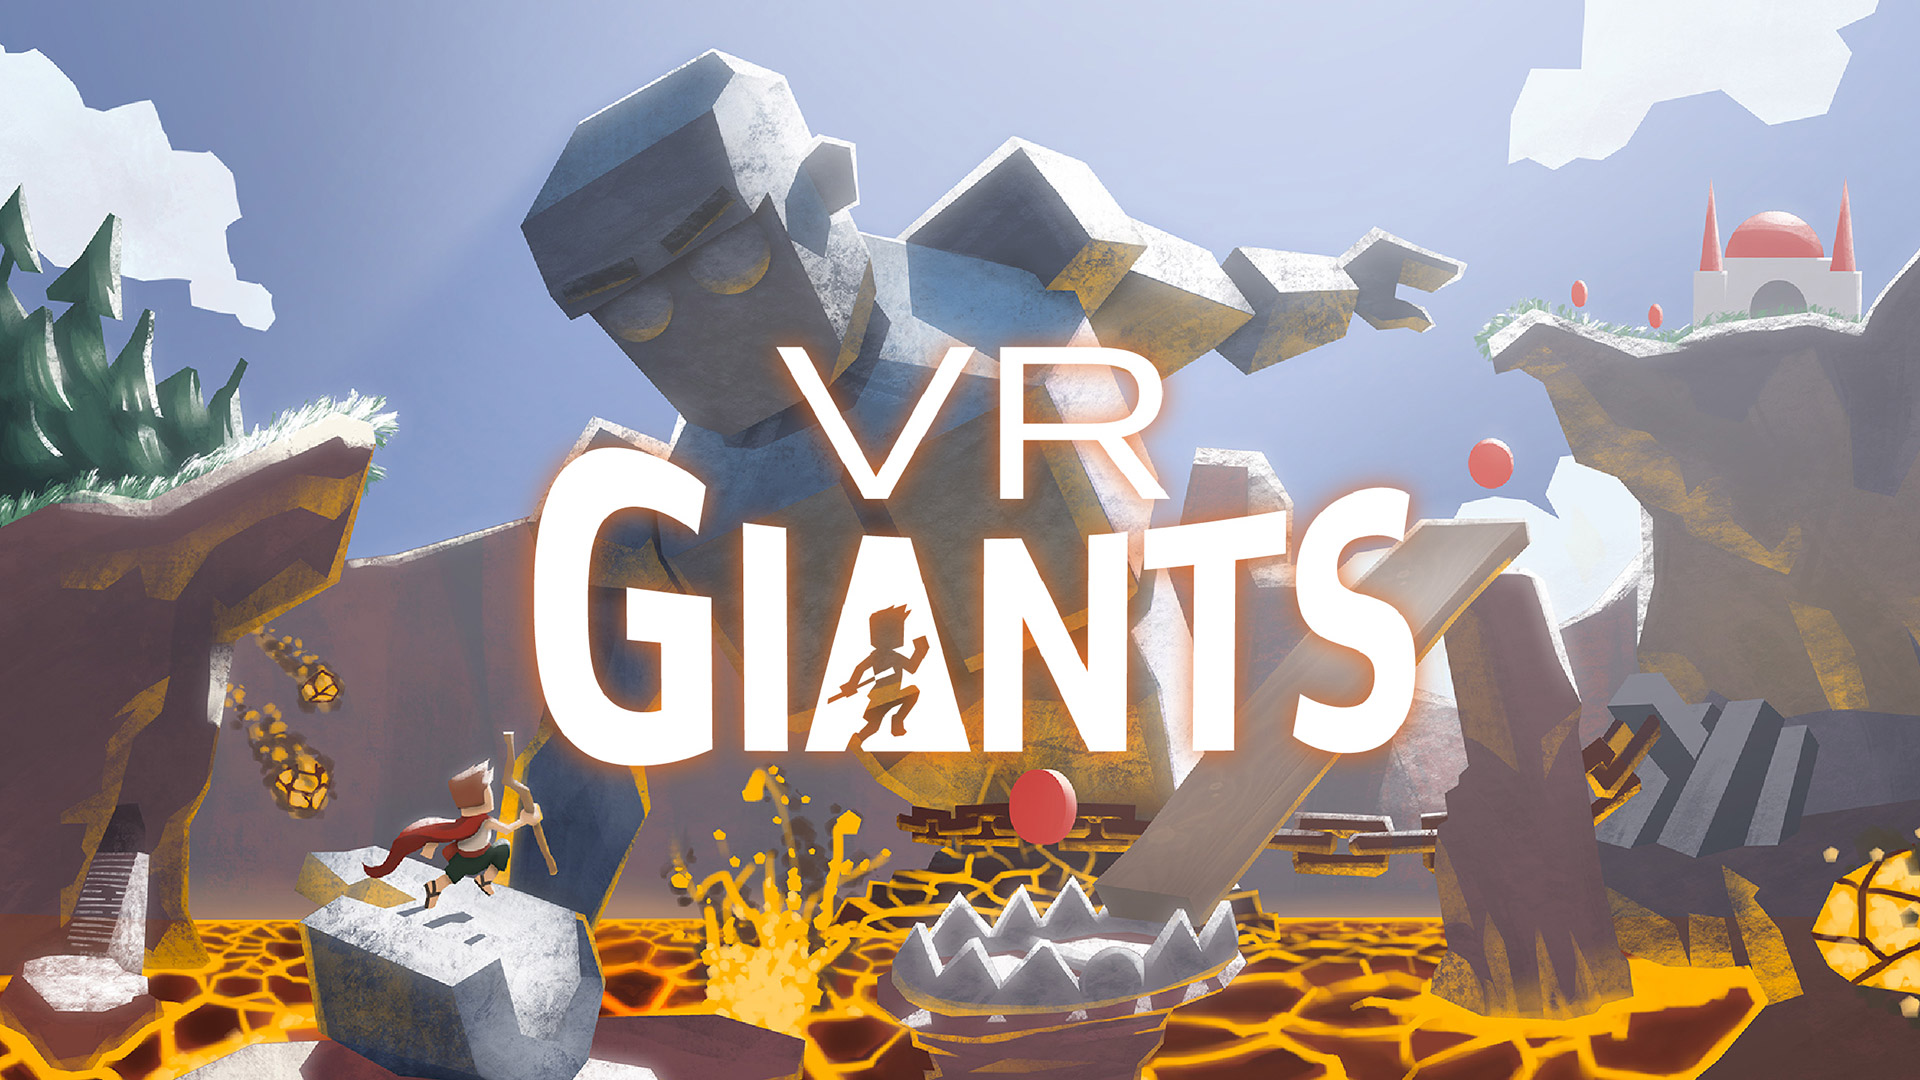 VR Giants is Another Great Fit for Steam Remote Play Together